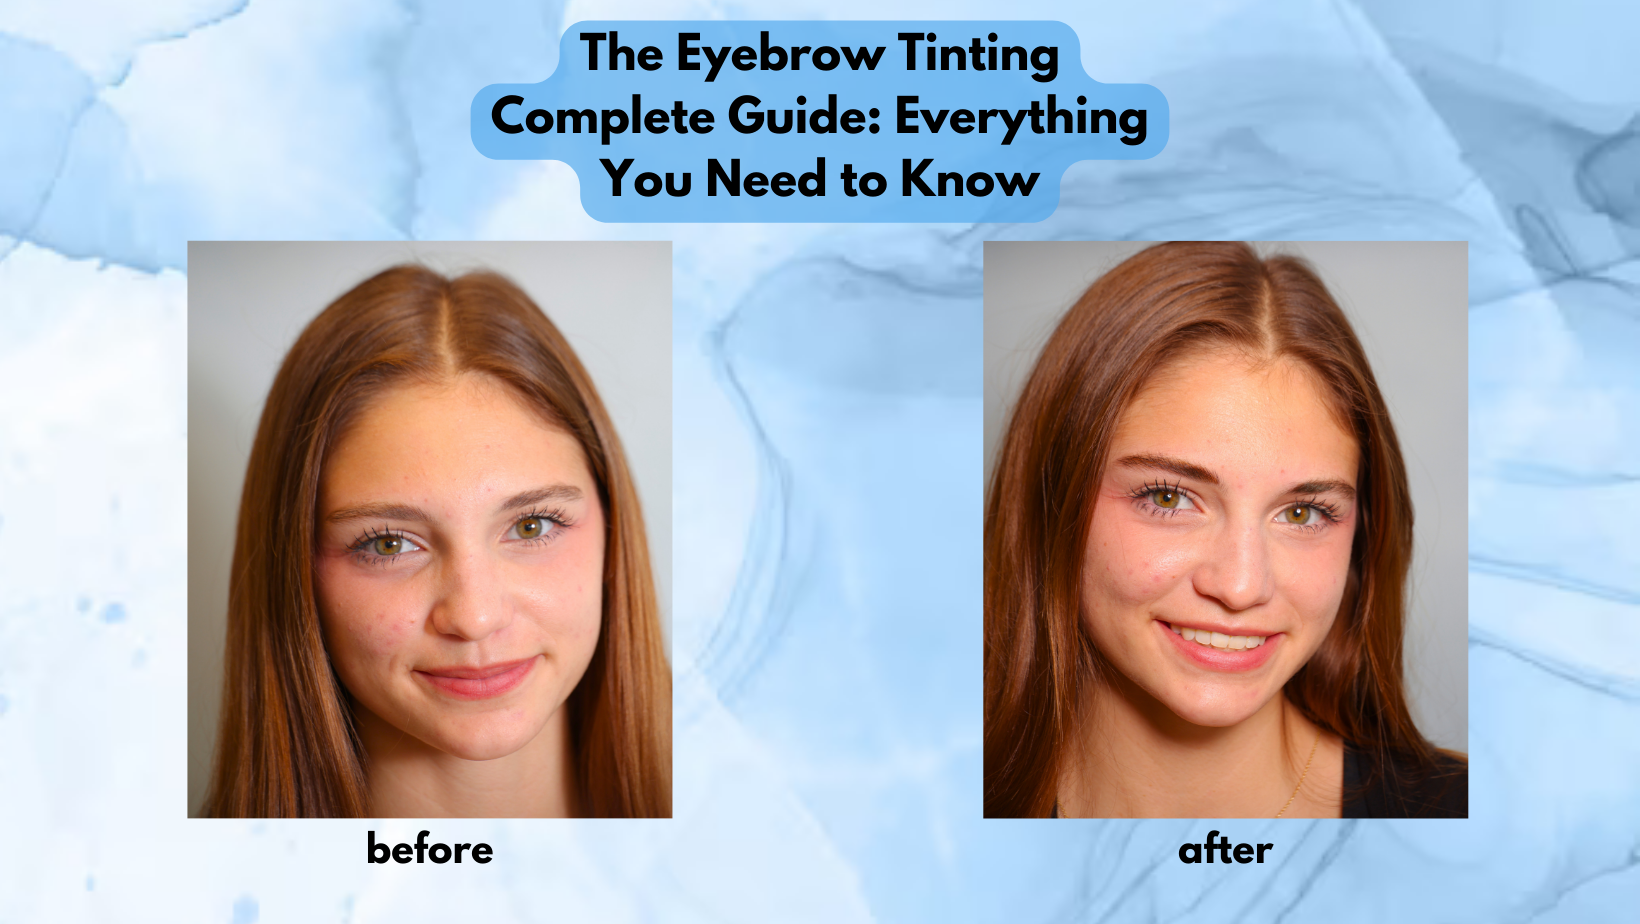 The Eyebrow Tinting Complete Guide